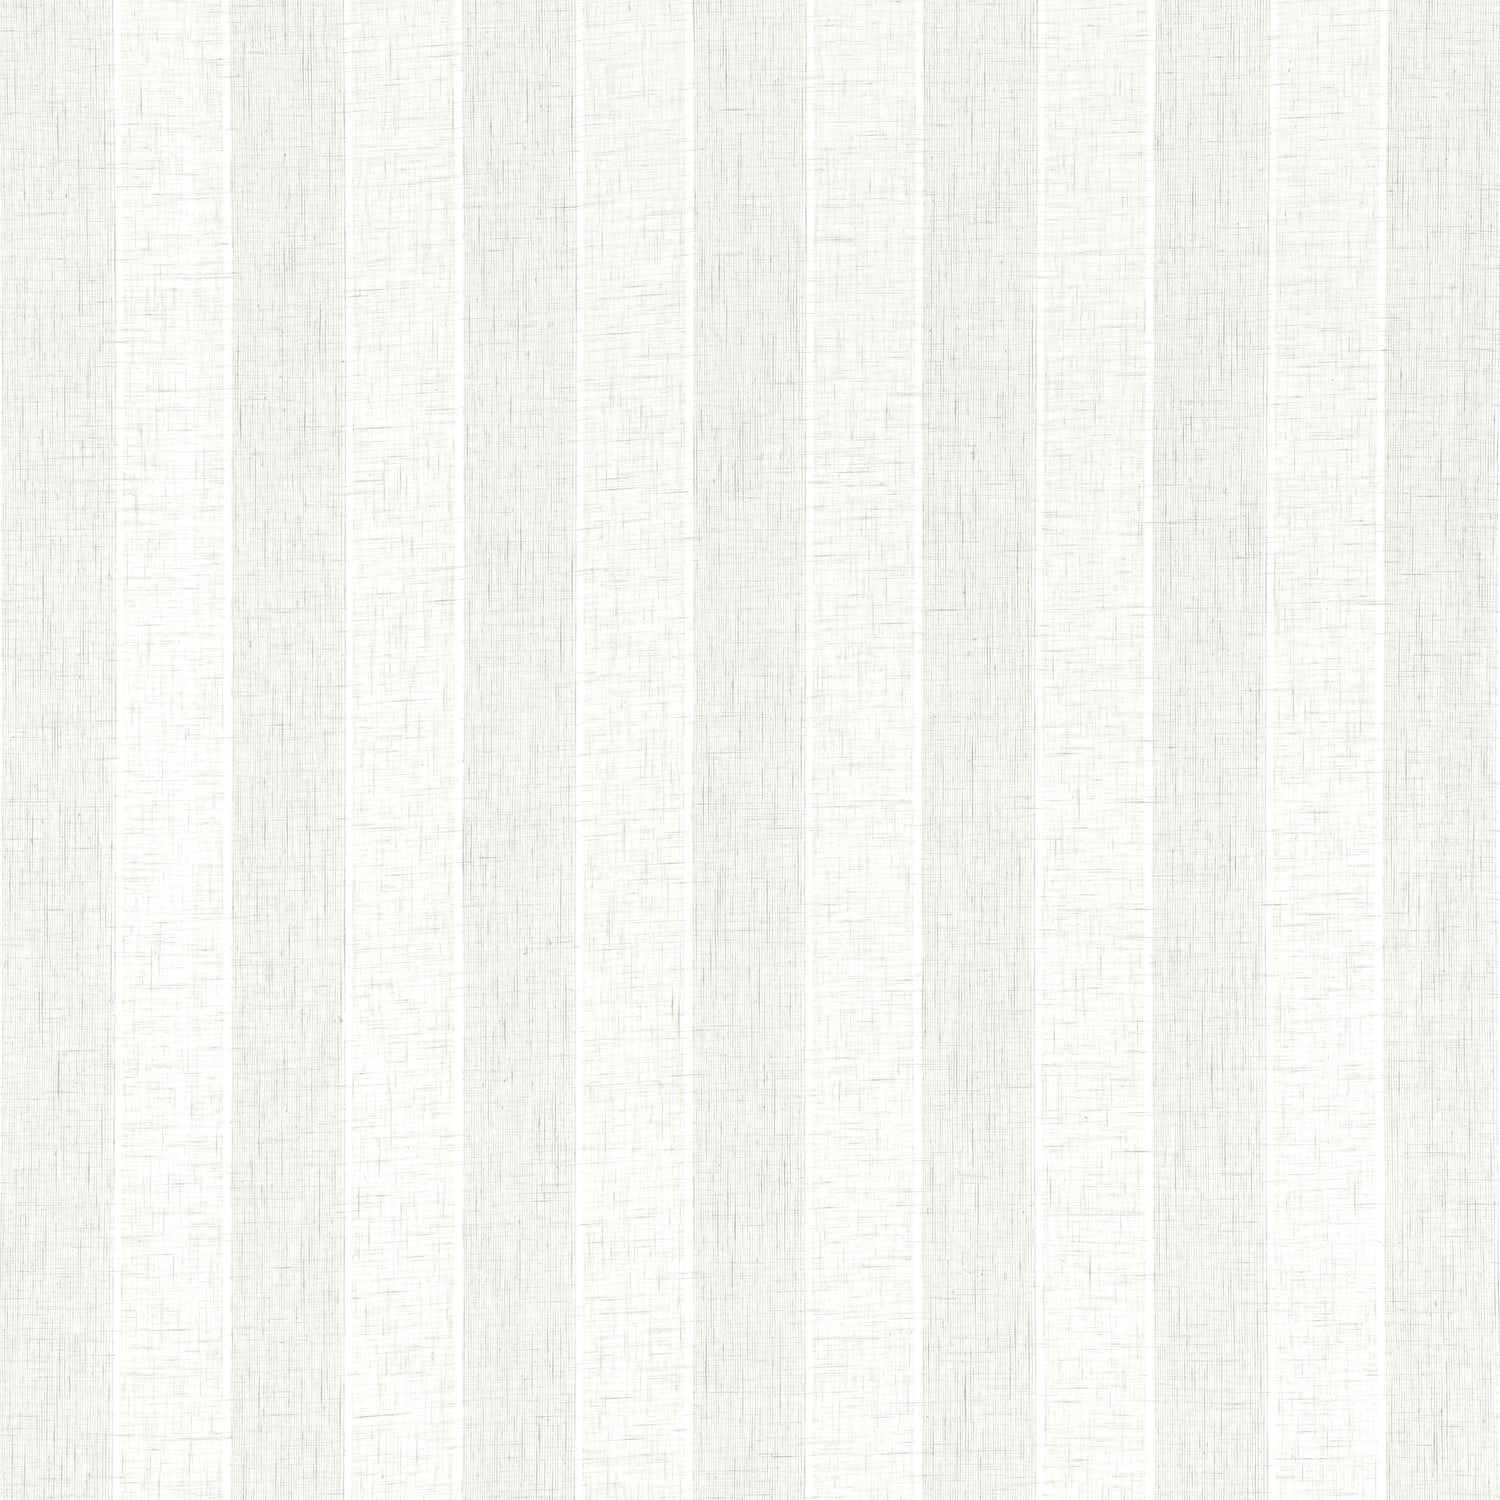 Erba Stripe fabric in ivory color - pattern number FWW8242 - by Thibaut in the Aura collection